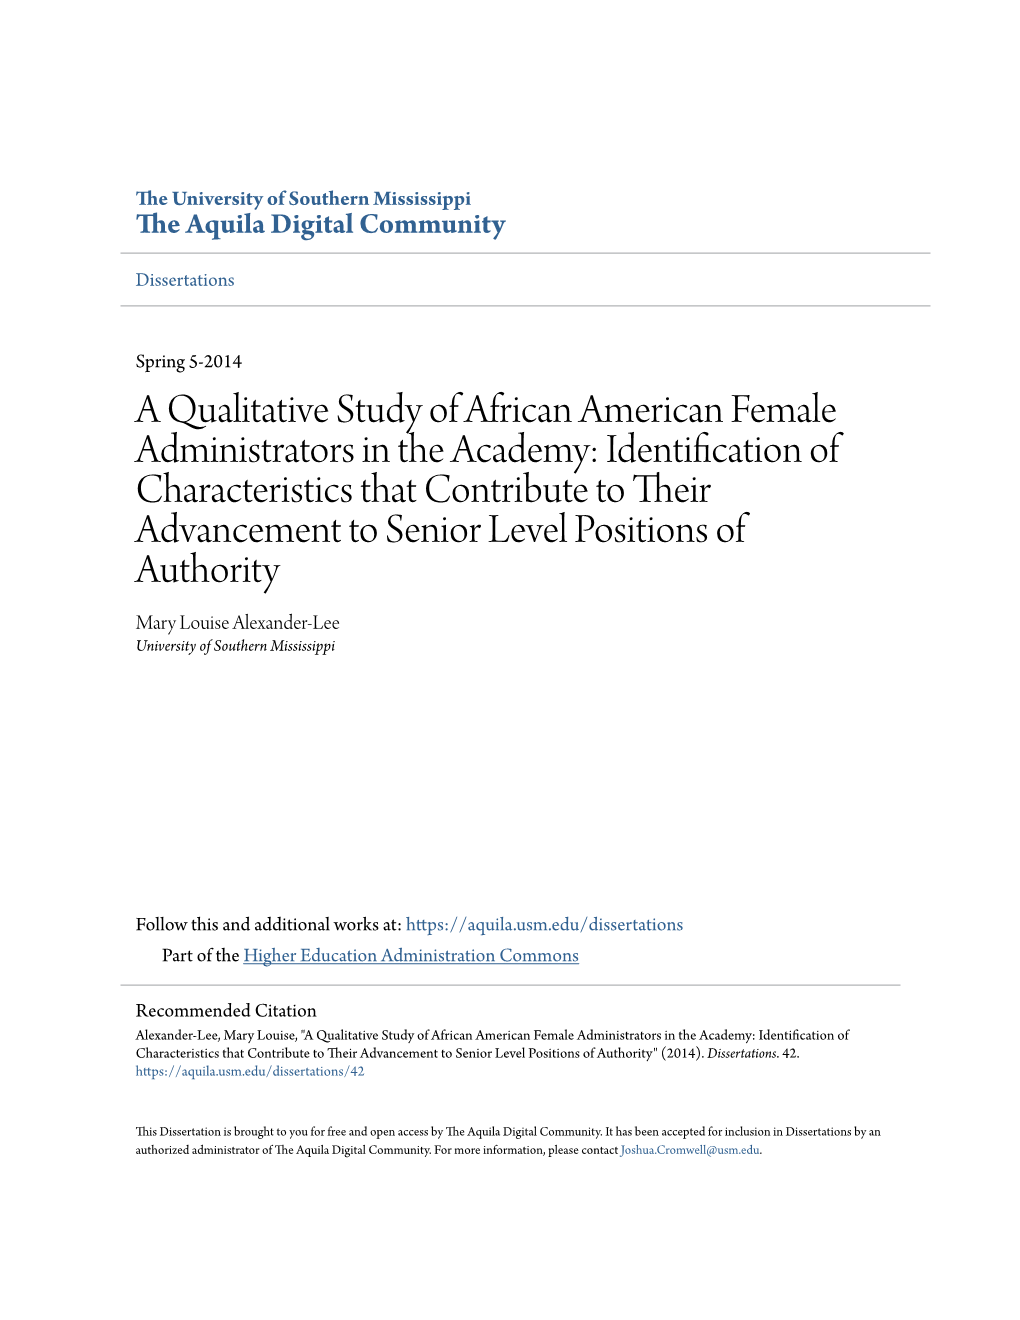 A Qualitative Study of African American Female Administrators In